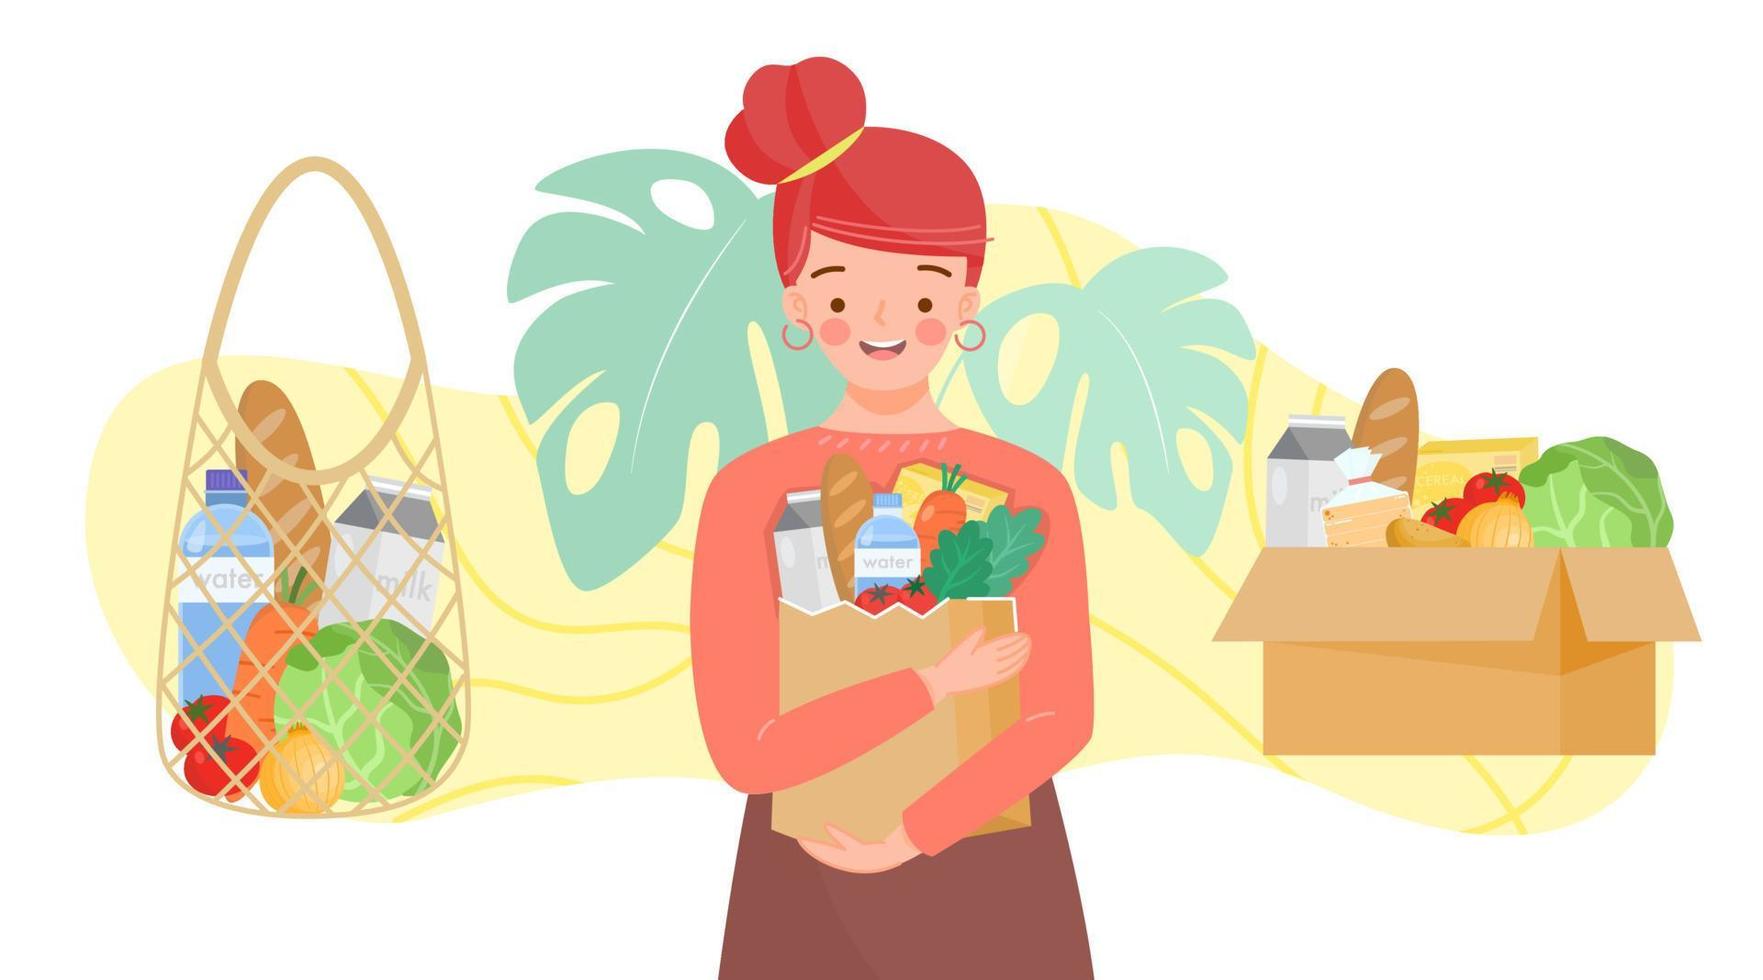 Girl holding paper bag with green grocer. Set of reusable bags and cardboard box of fruits, vegetables, milk, bread. Food products in reuse eco and paper package.Organic products from farm. vector